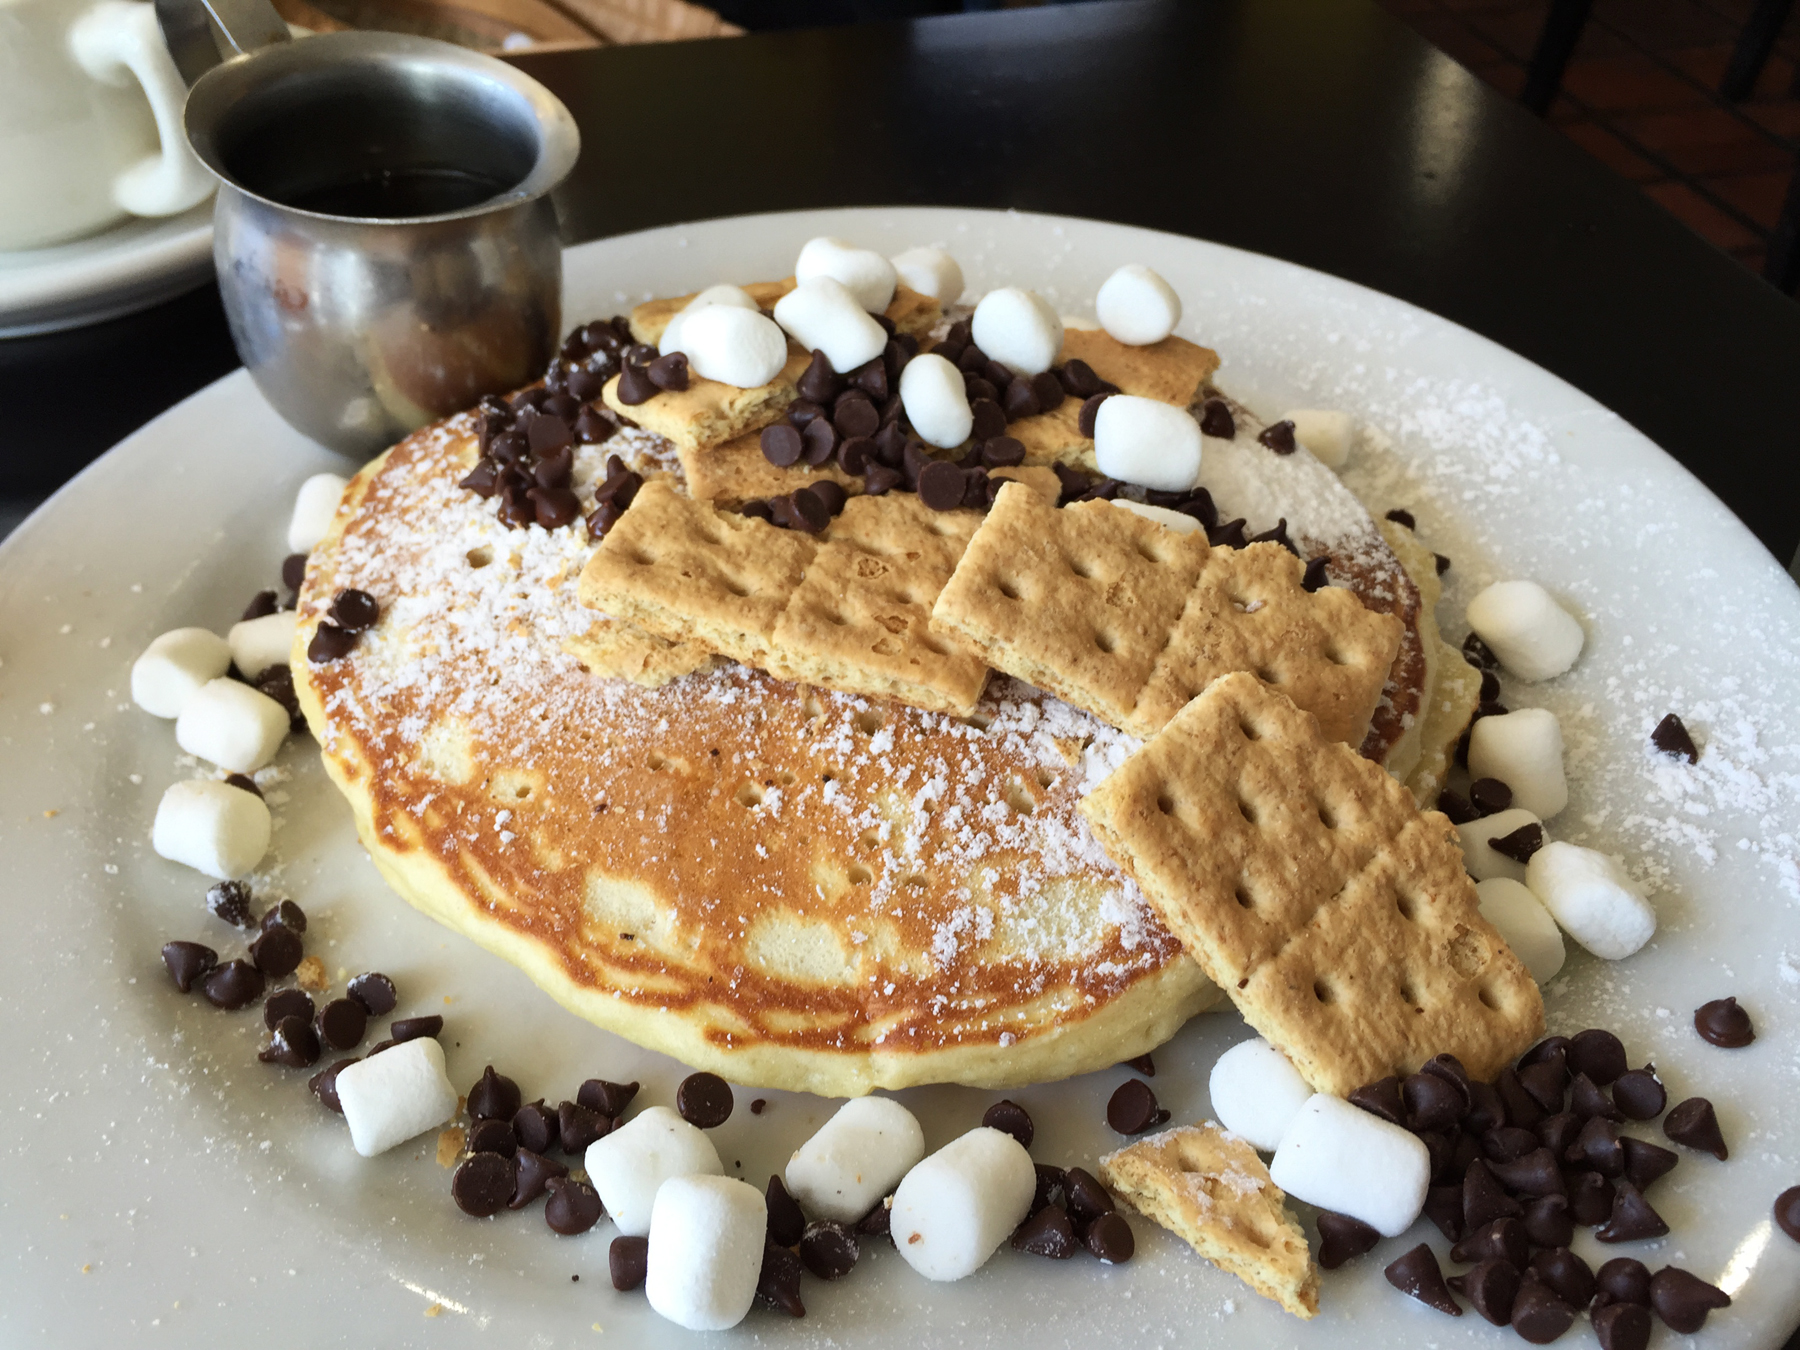 Brunch Doesn't Need to be Fancy to be Delicious - BeaBea's